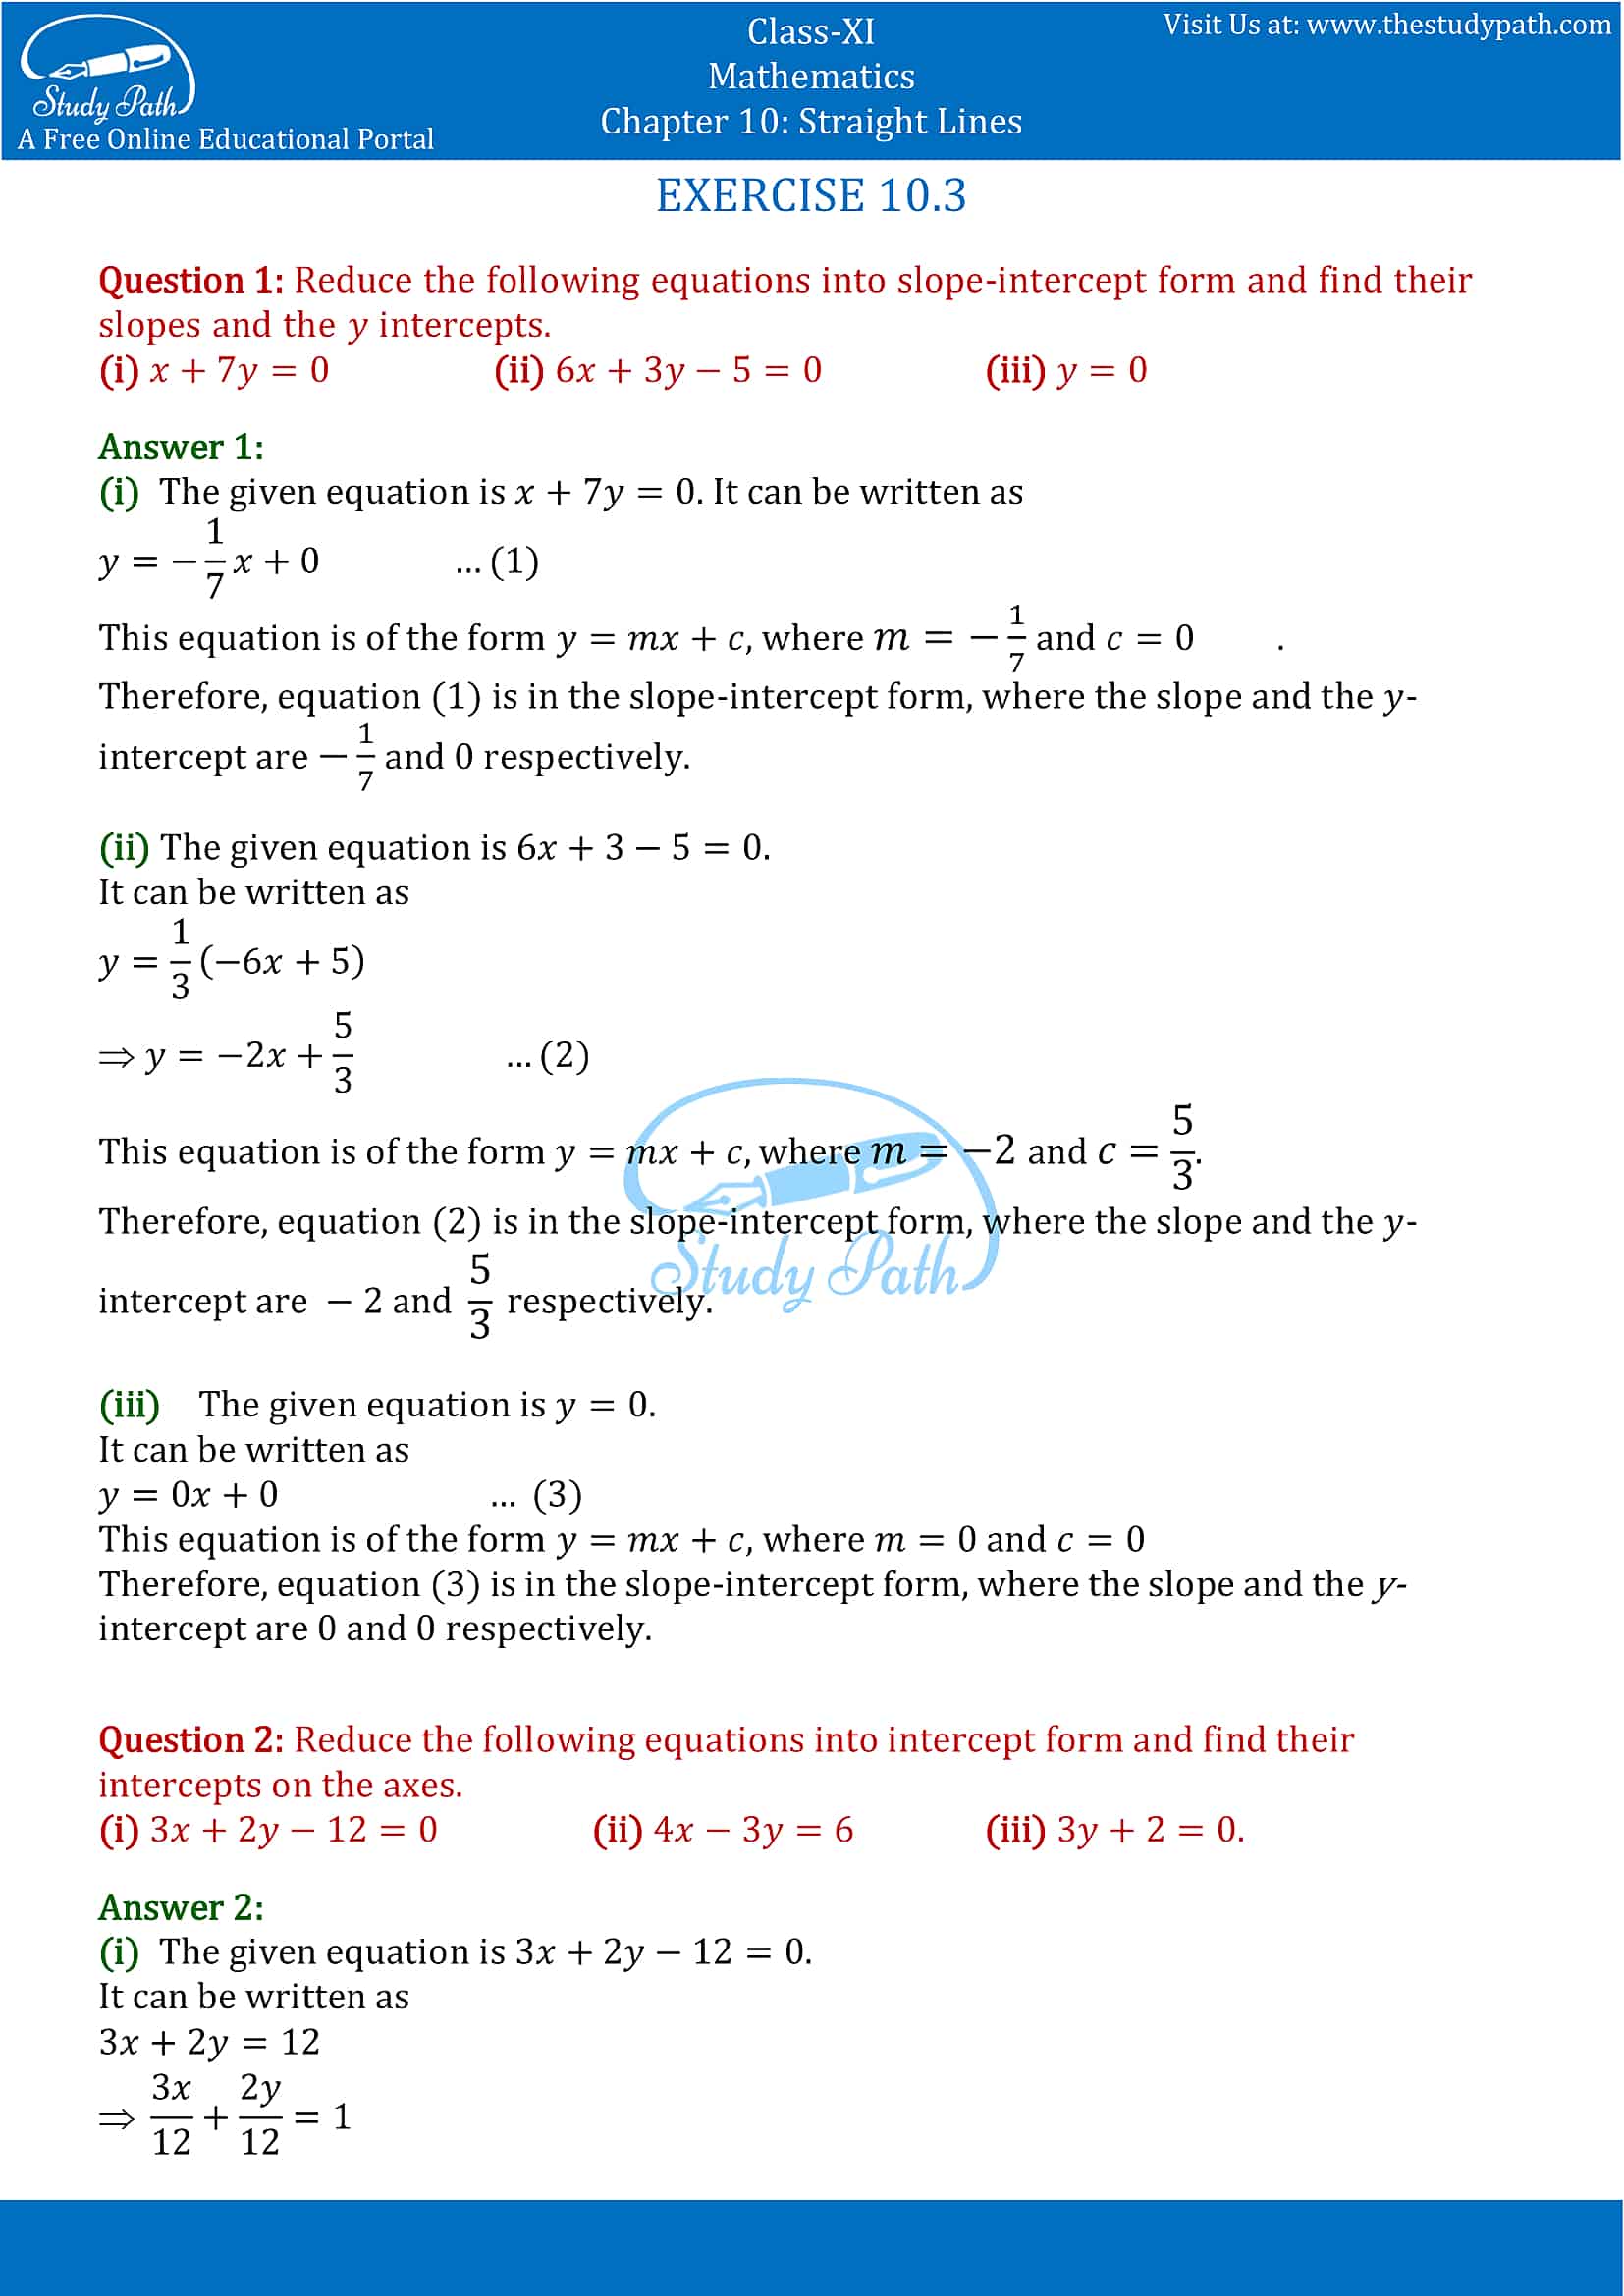 NCERT Solutions for Class 11 Maths chapter 10 Straight Lines Exercise 10.3 part-1